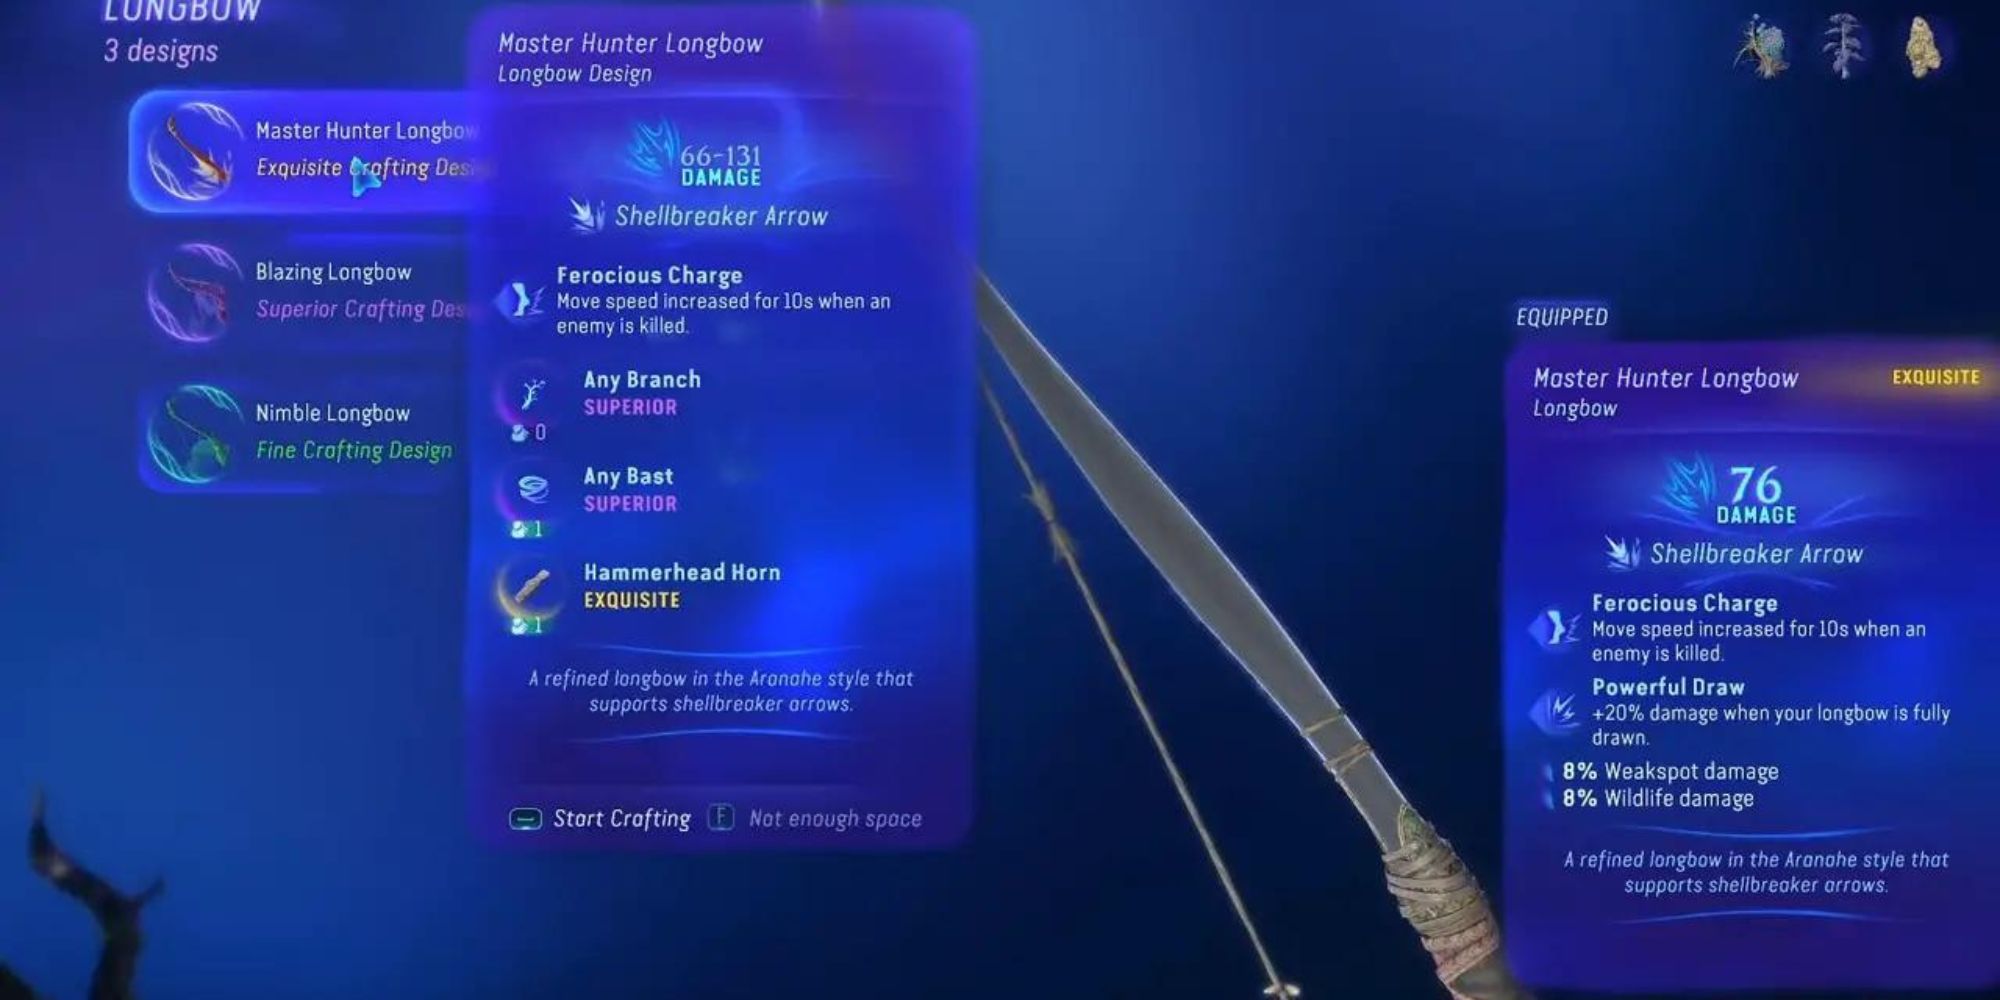 The Master Hunter Longbow in the player inventory